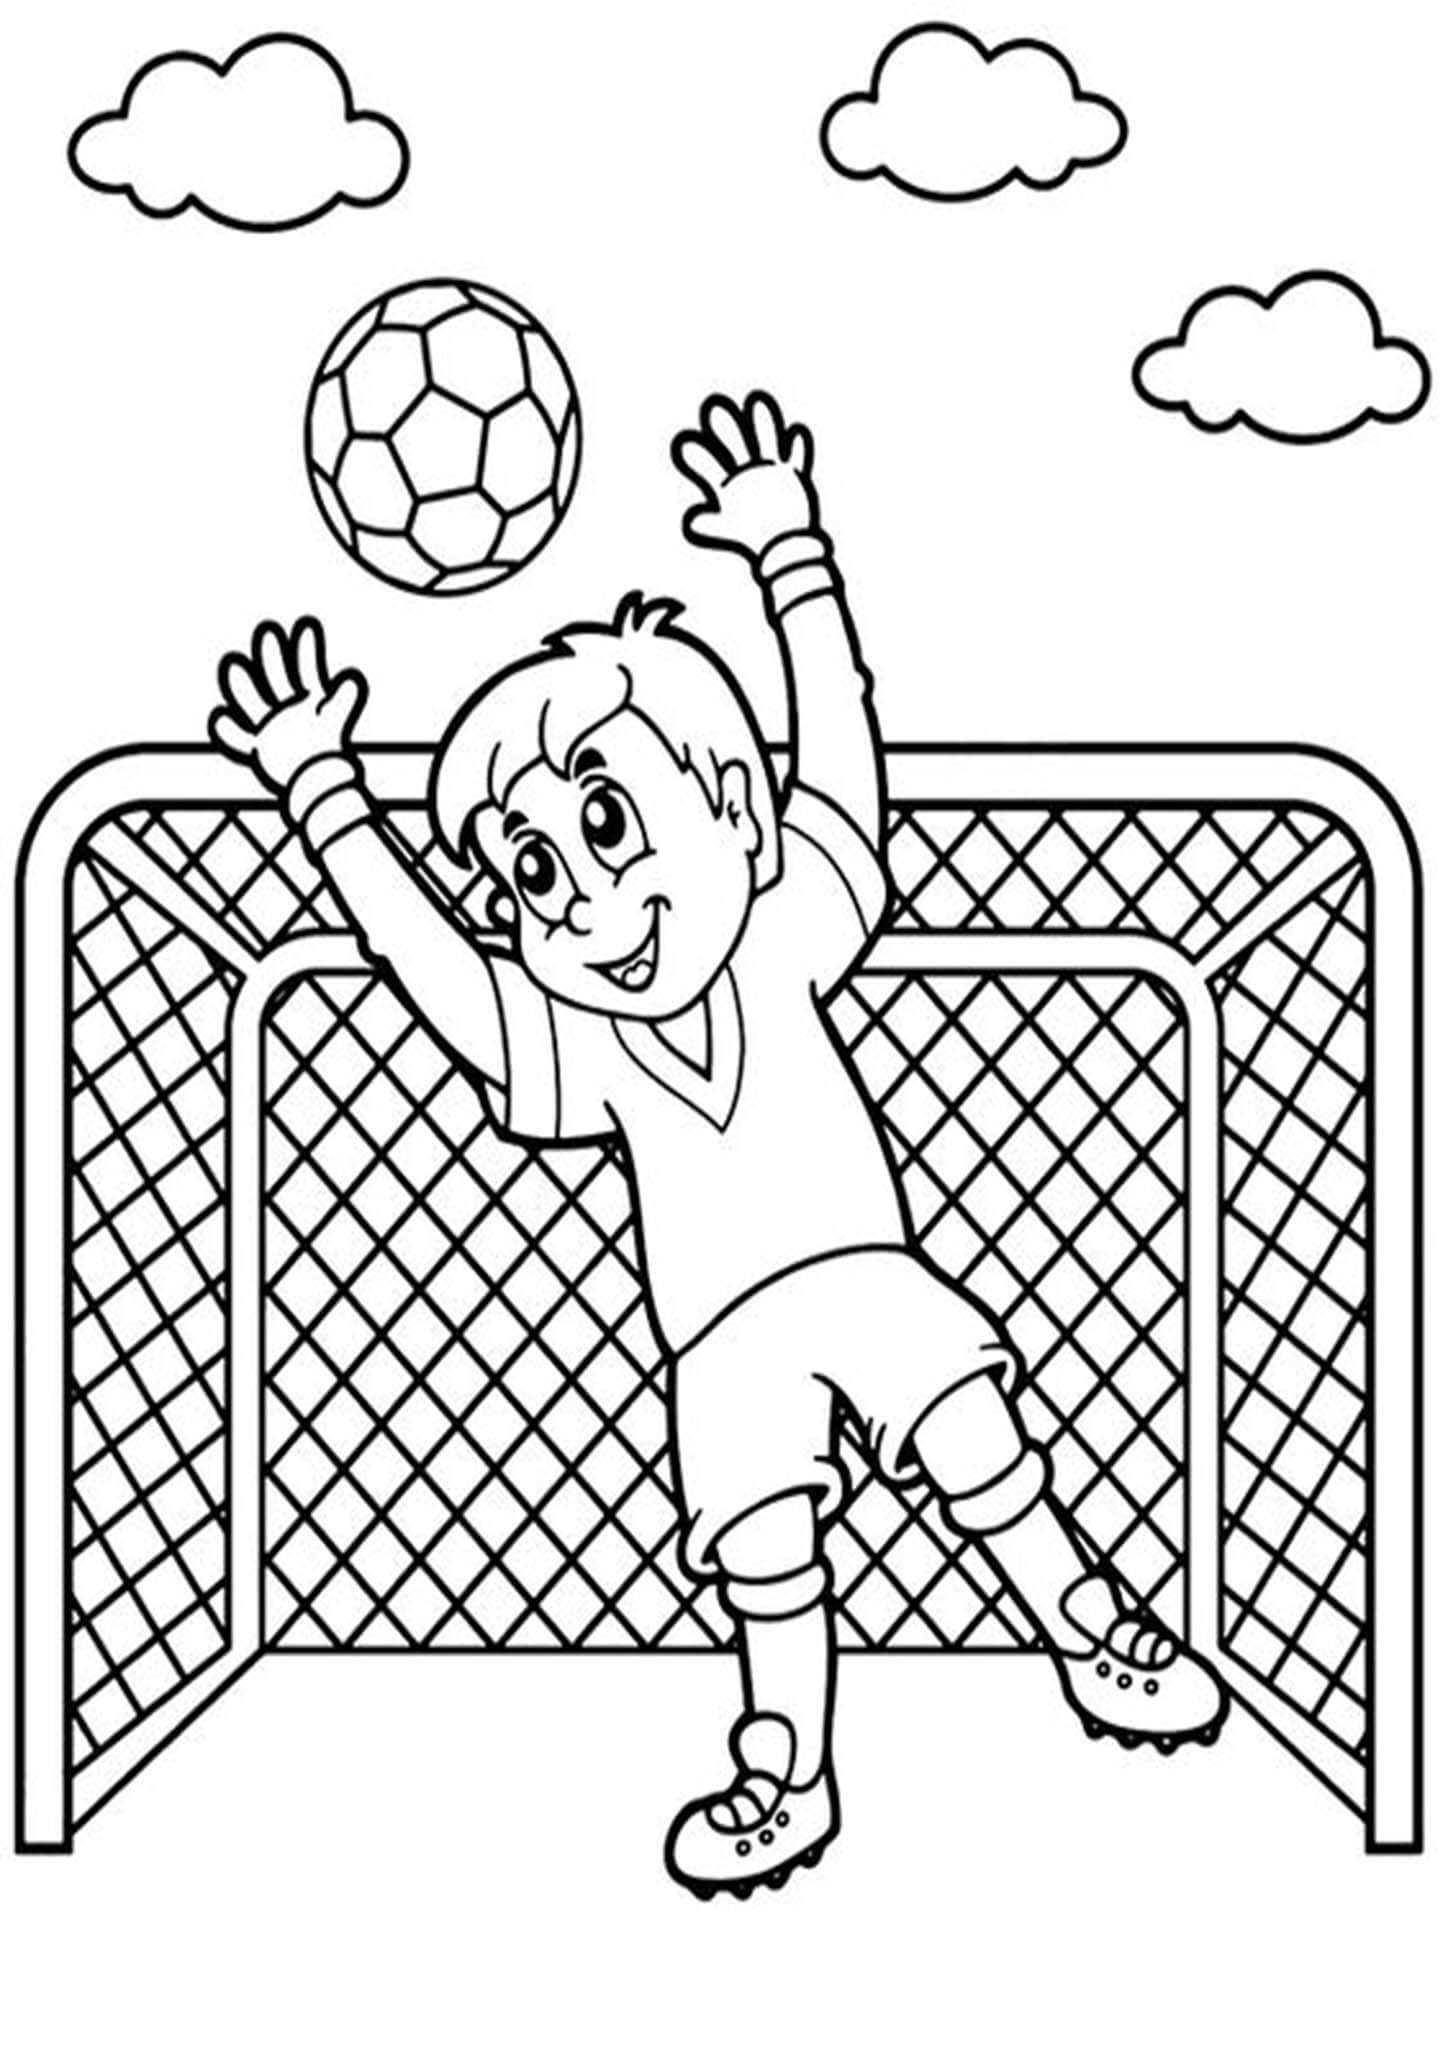 Free Easy To Print Soccer Coloring Pages Tulamama